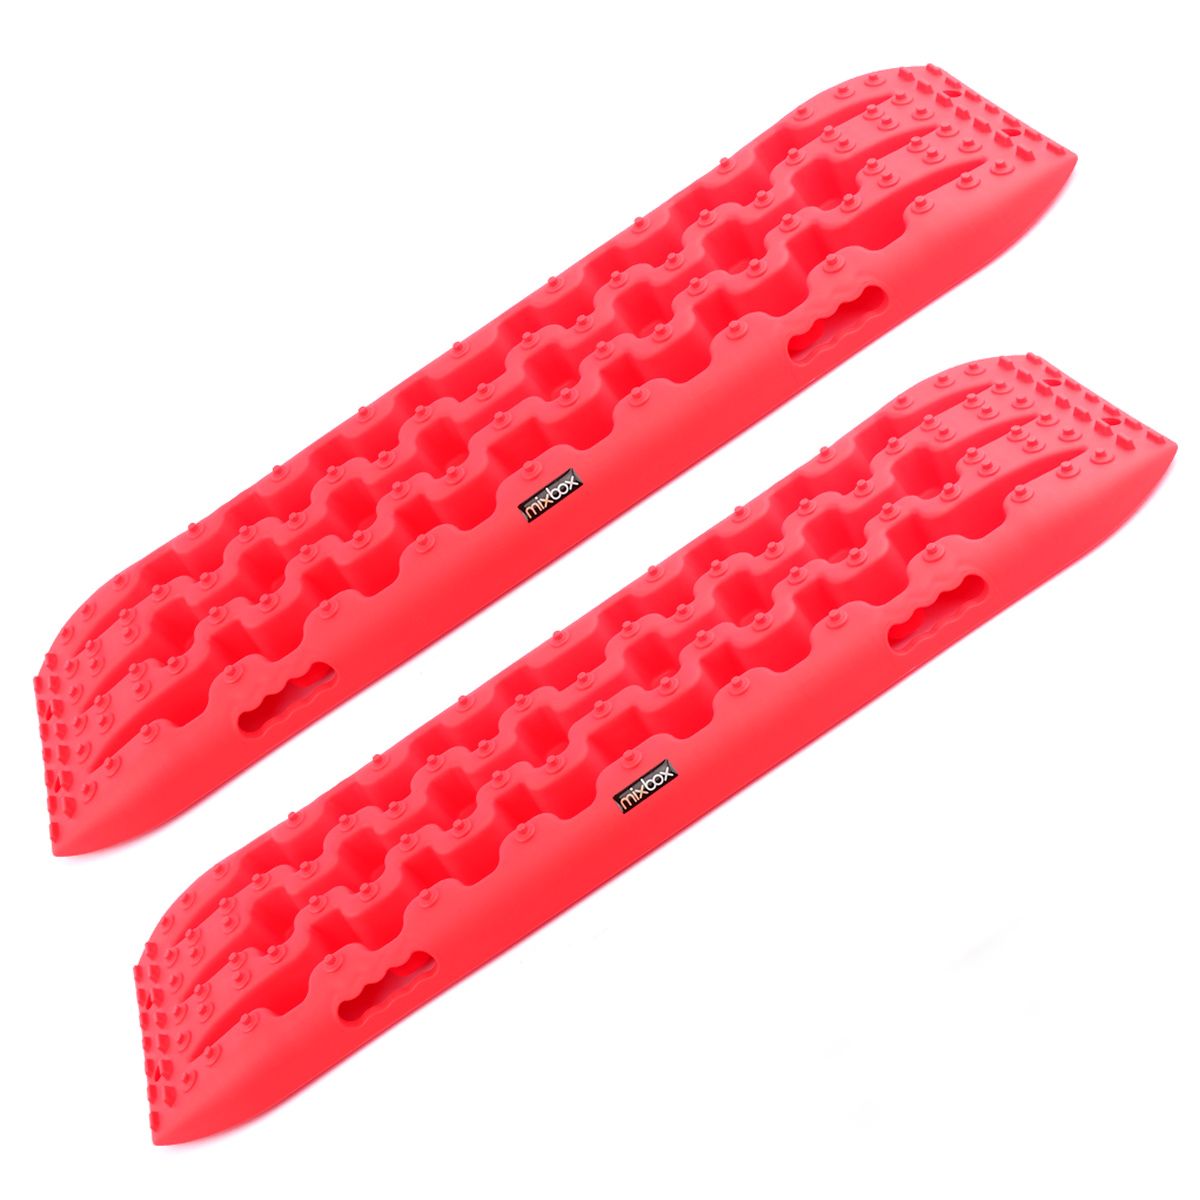 Mix Box Traction Boards Sand Tire Ladder 4X4 Tracks Plates 2 Pcs